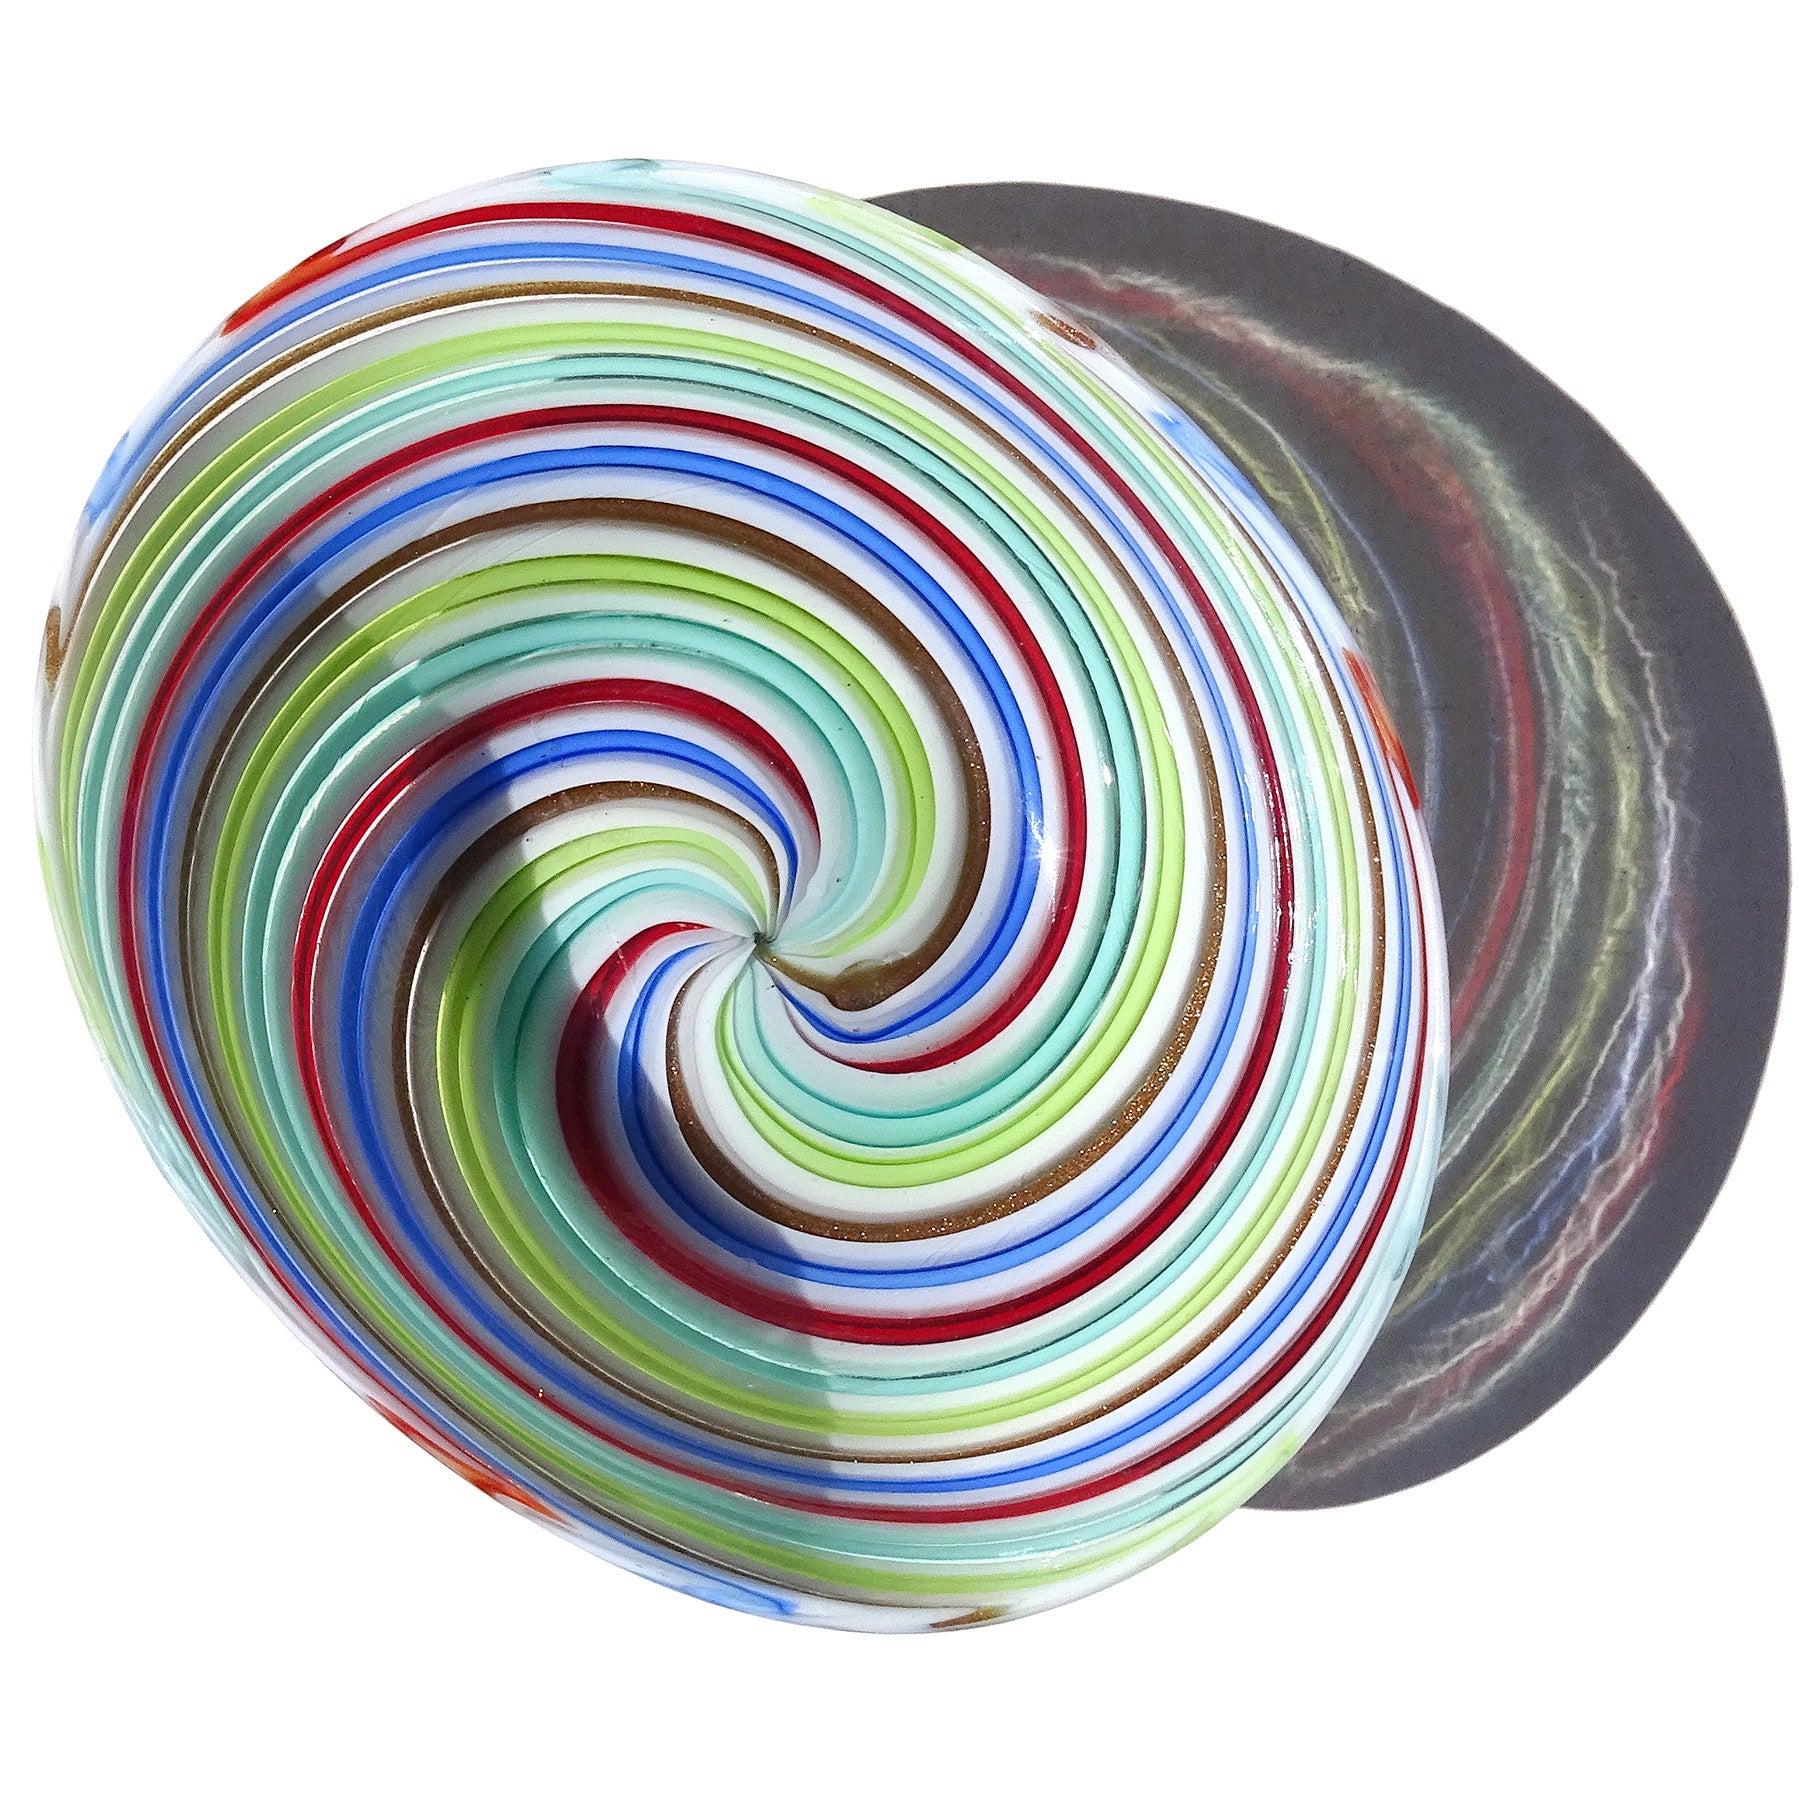 Beautiful vintage Murano hand blown red, pink and blue ribbons Italian art glass dish. Attributed to designer Dino Martens for Aureliano Toso. The swirling ribbons have an alternating pattern, creating an optic effect. It also have a line with